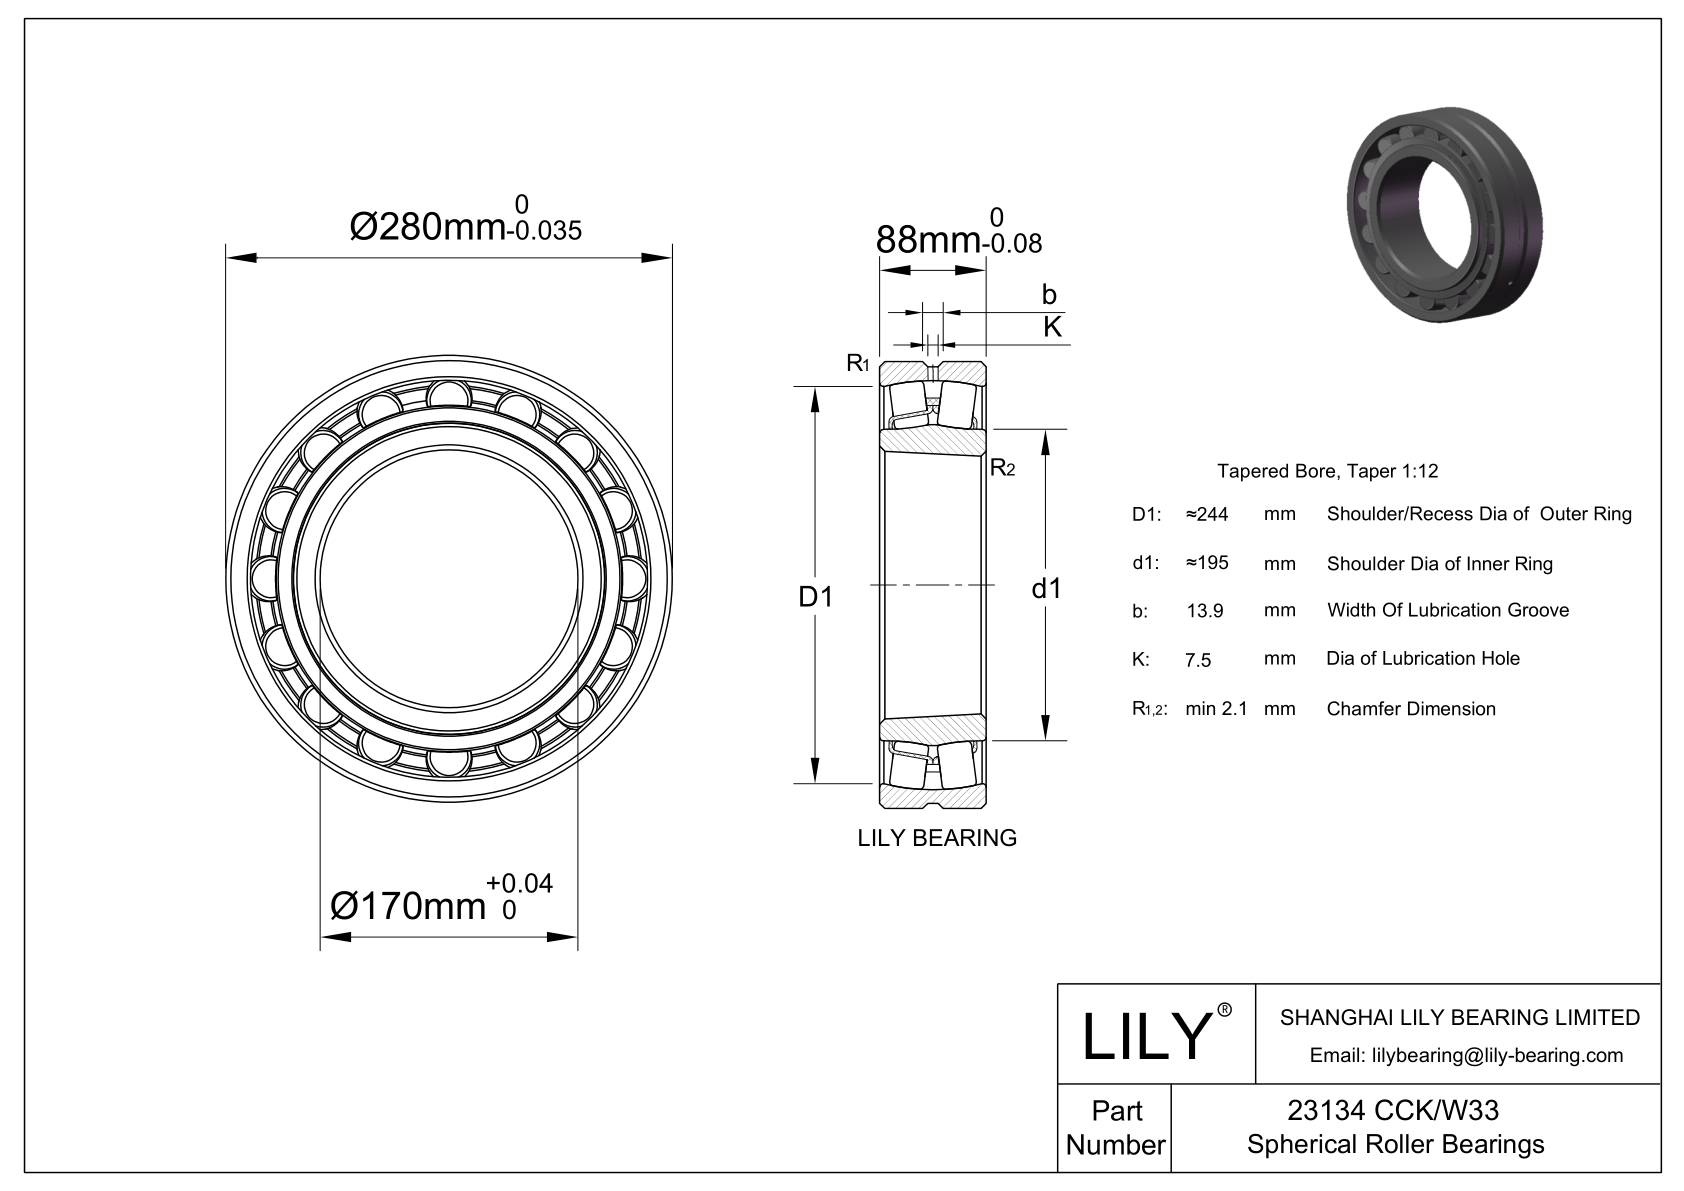 23134 CCK/W33 Double Row Spherical Roller Bearing cad drawing